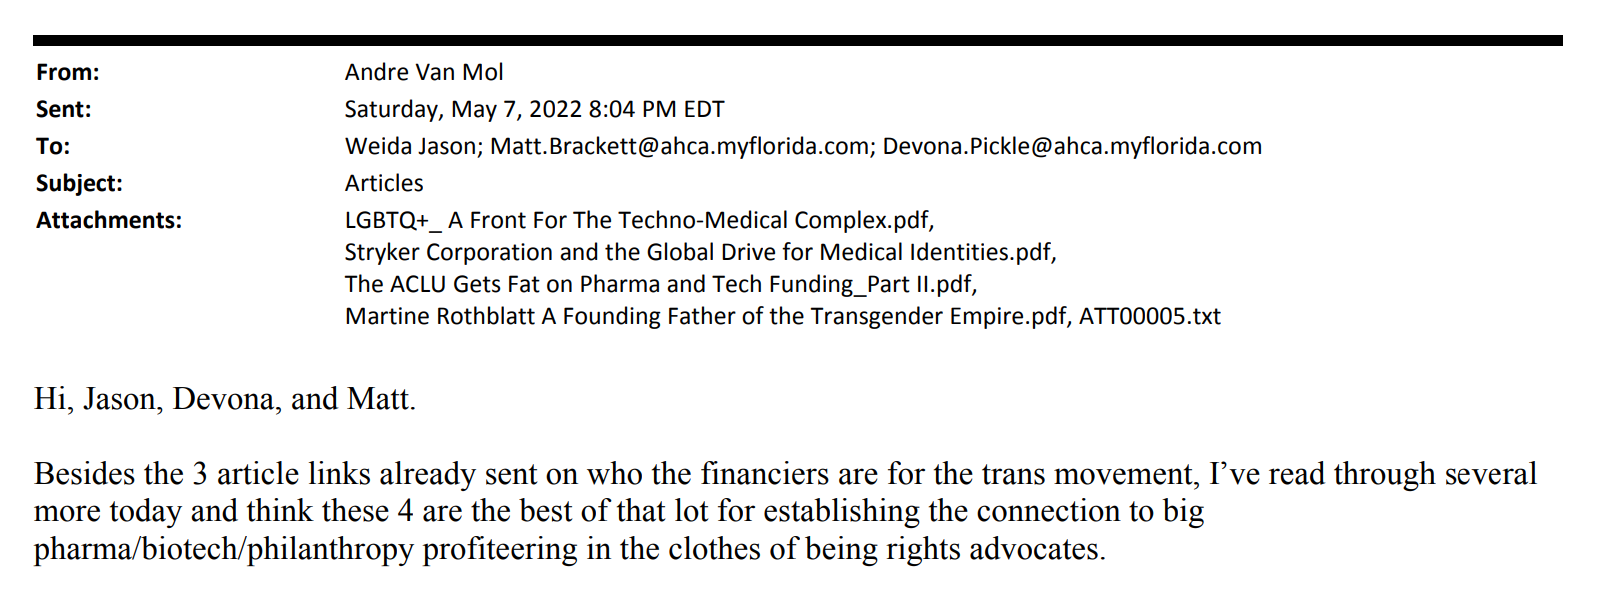 Plaintiffs’ trial exhibit 285. Email. From: Andre Van Mol. Sent: Saturday, May 7, 2022 8:04 PM EDT. To: Weida Jason; Matt.Brackett@ahca.myflorida.com; Devona.Pickle@ahca.myflorida.com. Subject: Articles. Attachments: LGBTQ+_A Front For The Techno-Medical Complex.pdf, Stryker Corporation and the Global Drive for Medical Identities.pdf, The ACLU Gets Fat on Pharma and Tech Funding_Part ll.pdf, Martine Rothblatt A Founding Father of the Transgender Empire.pdf, ATT00005.txt. Body: Hi, Jason, Devona, and Matt. Besides the 3 article links already sent on who the financiers are for the trans movement, I've read through several more today and think these 4 are the best of that lot for establishing the connection to big pharma/biotech/philanthropy profiteering in the clothes of being rights advocates.